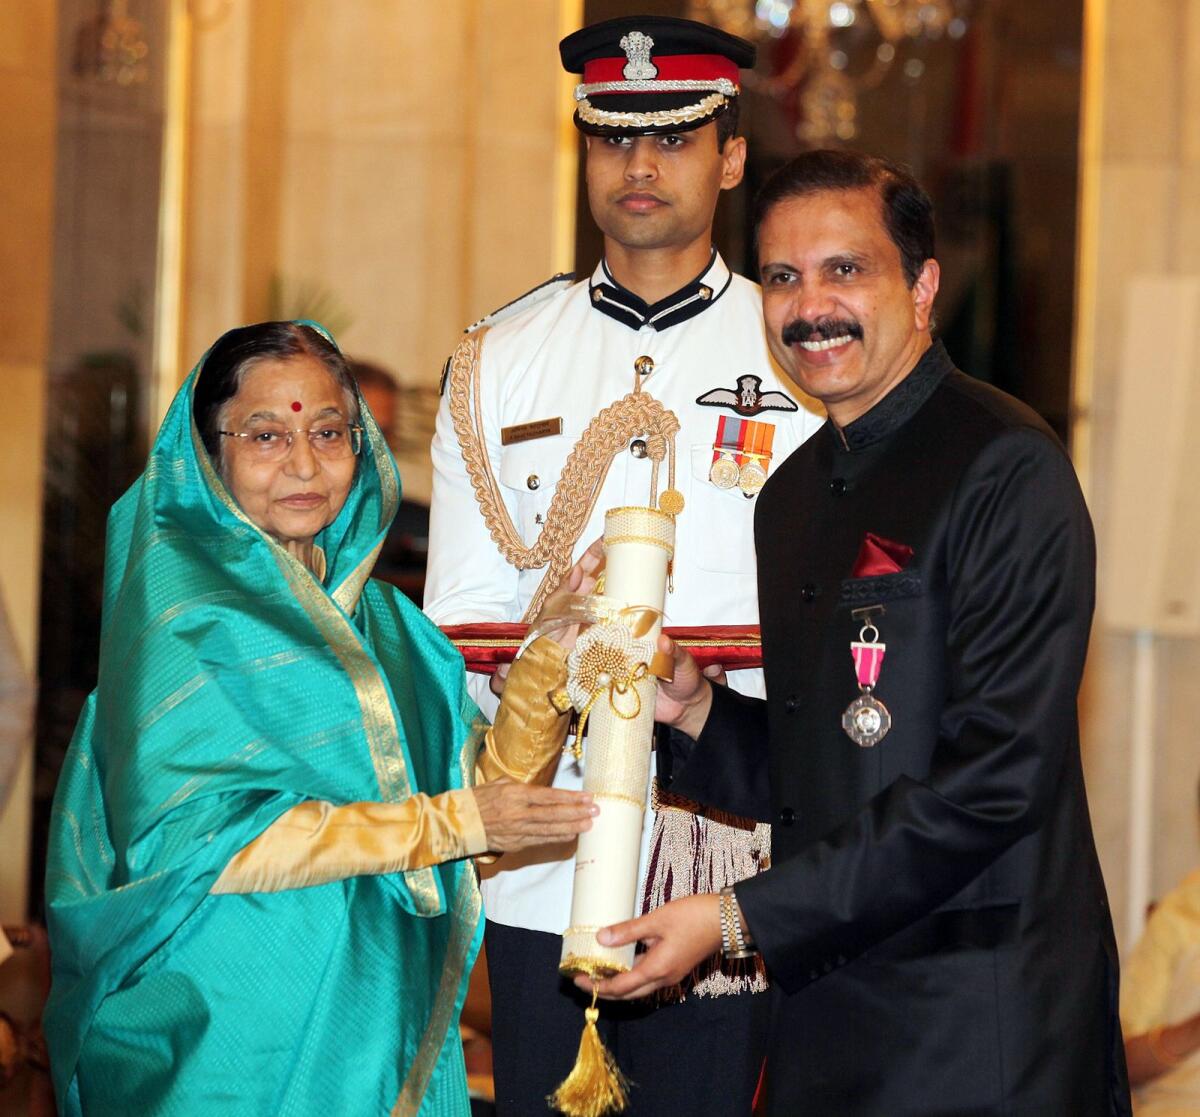 Dr Azad Moopen receiving the Padma Sri Award from President of India